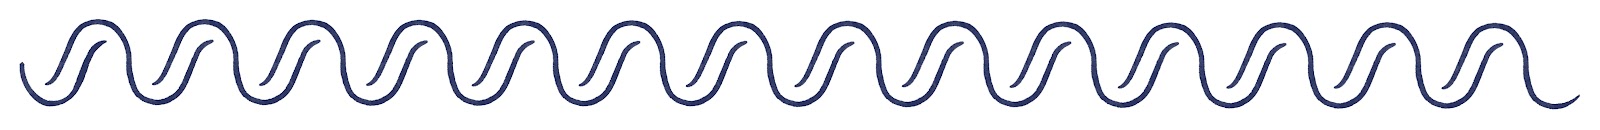 Graphic of waves